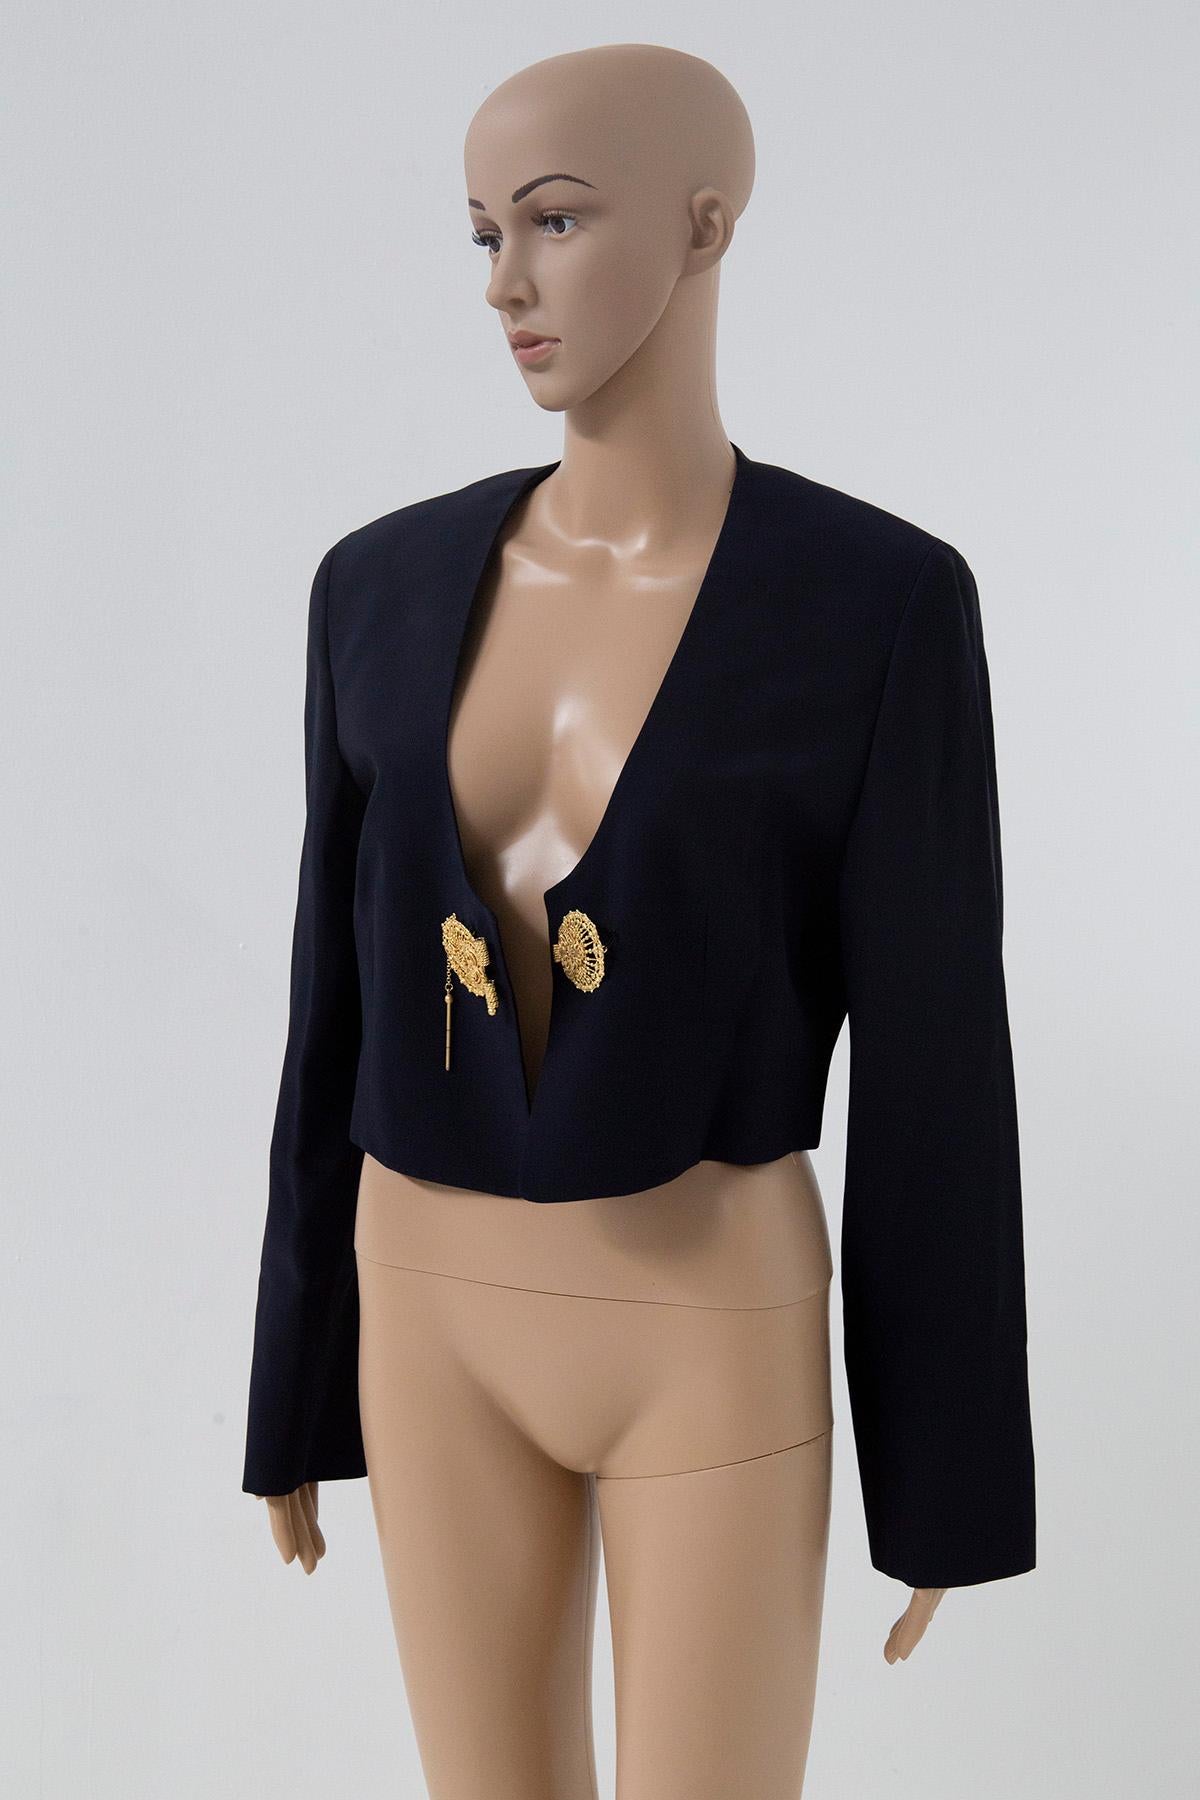 Enter the world of timeless elegance with Studio 001 Ferrè, a creation of visionary designer Gianfranco Ferrè. This cropped waist jacket is not just a piece of clothing, but a work that encapsulates the essence of sophistication and style.

Running